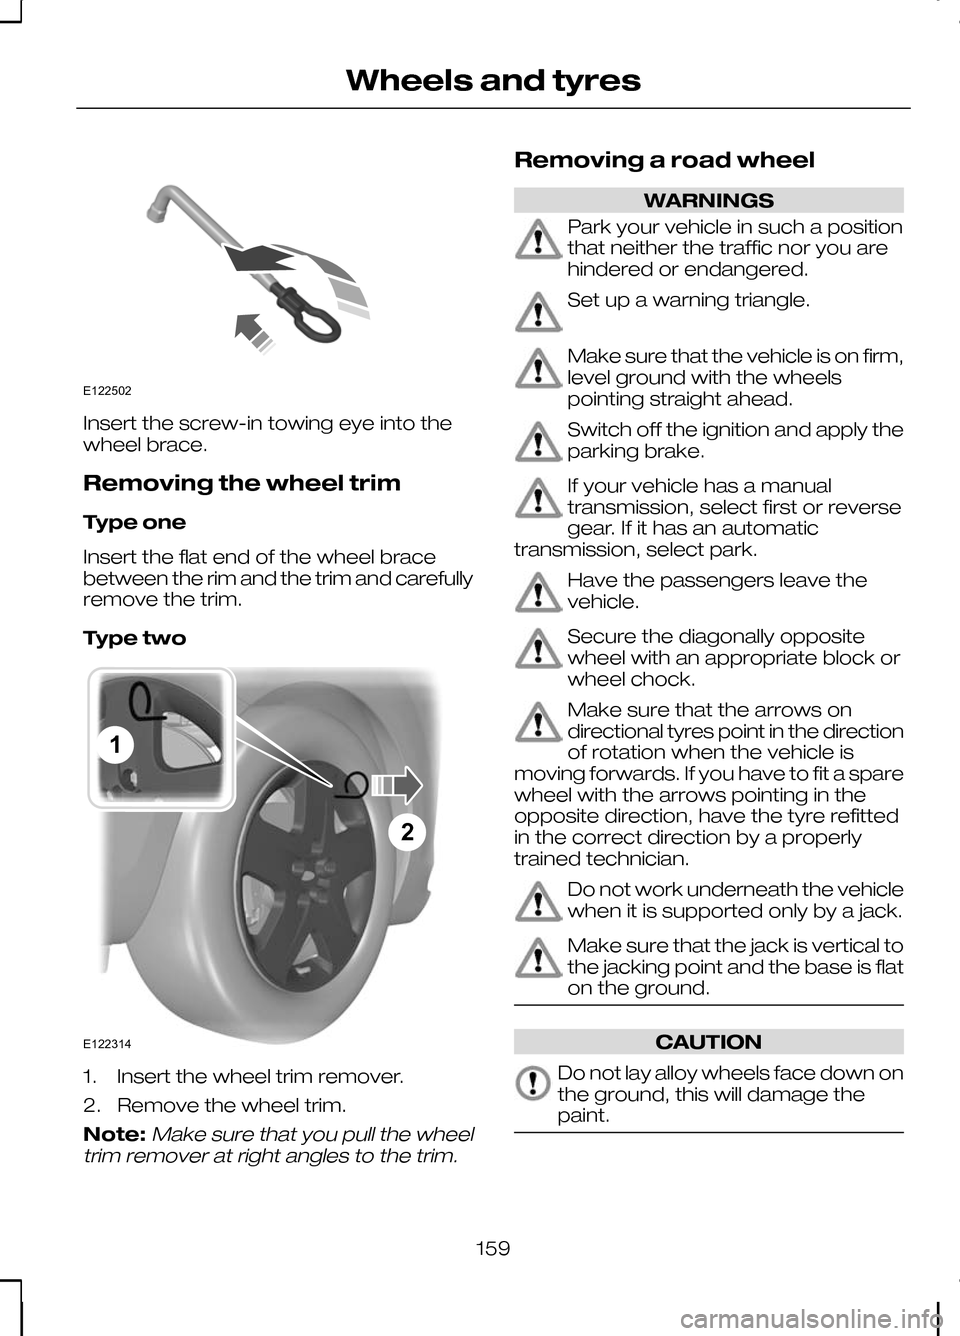 FORD KUGA 2010 1.G Owners Manual Insert the screw-in towing eye into the
wheel brace.
Removing the wheel trim
Type one
Insert the flat end of the wheel brace
between the rim and the trim and carefully
remove the trim.
Type two
1. Ins